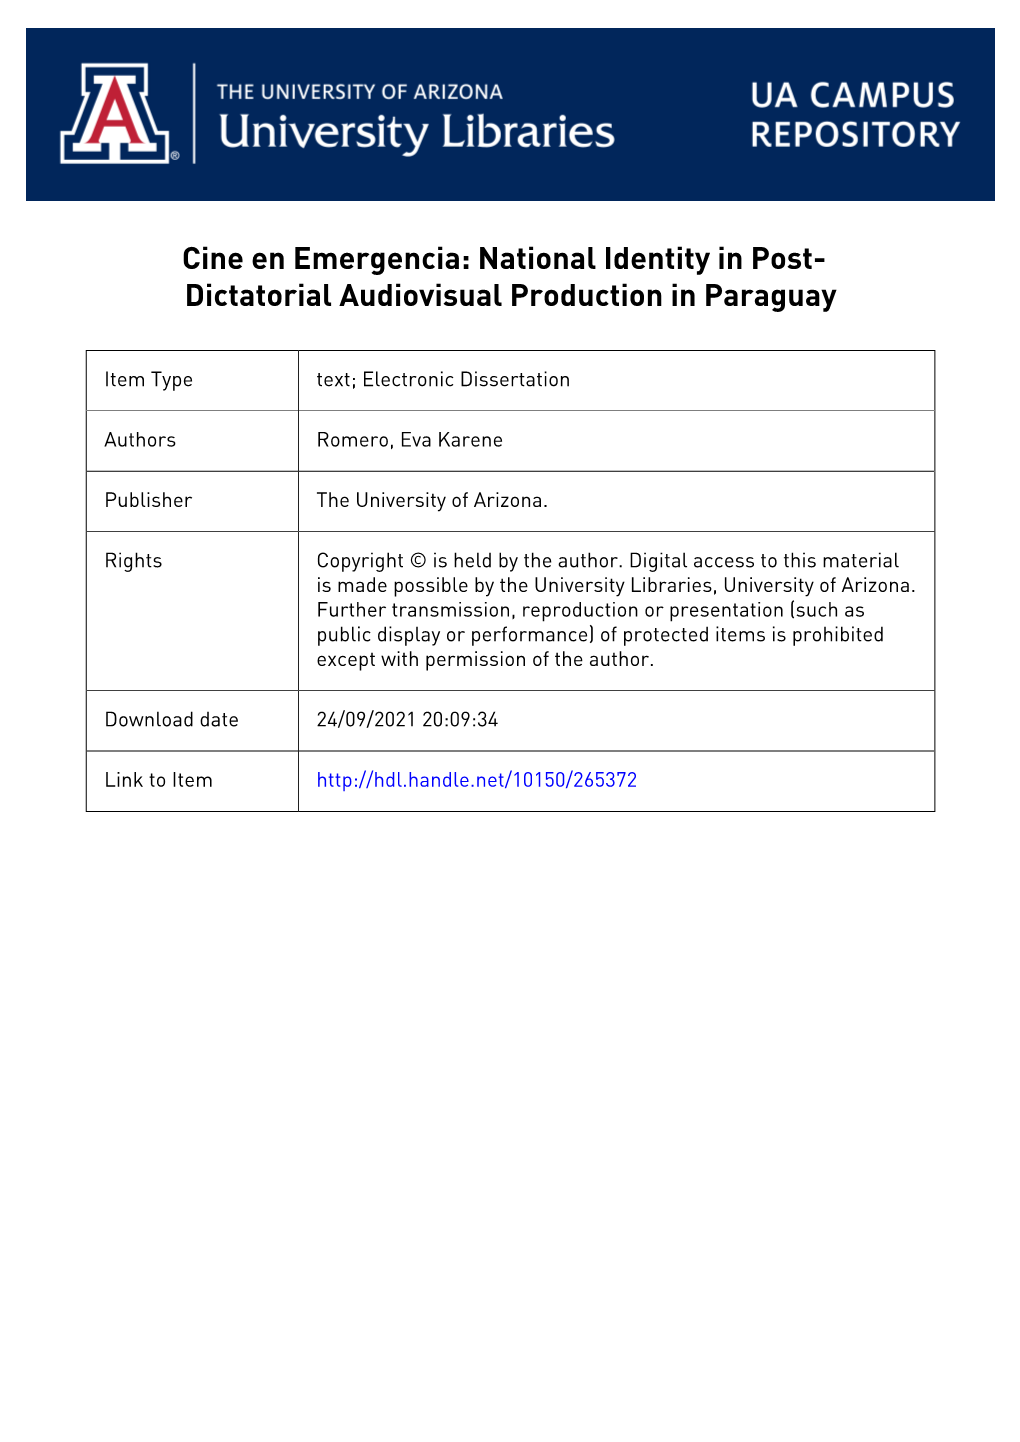 Cine En Emergencia: National Identity in Post- Dictatorial Audiovisual Production in Paraguay